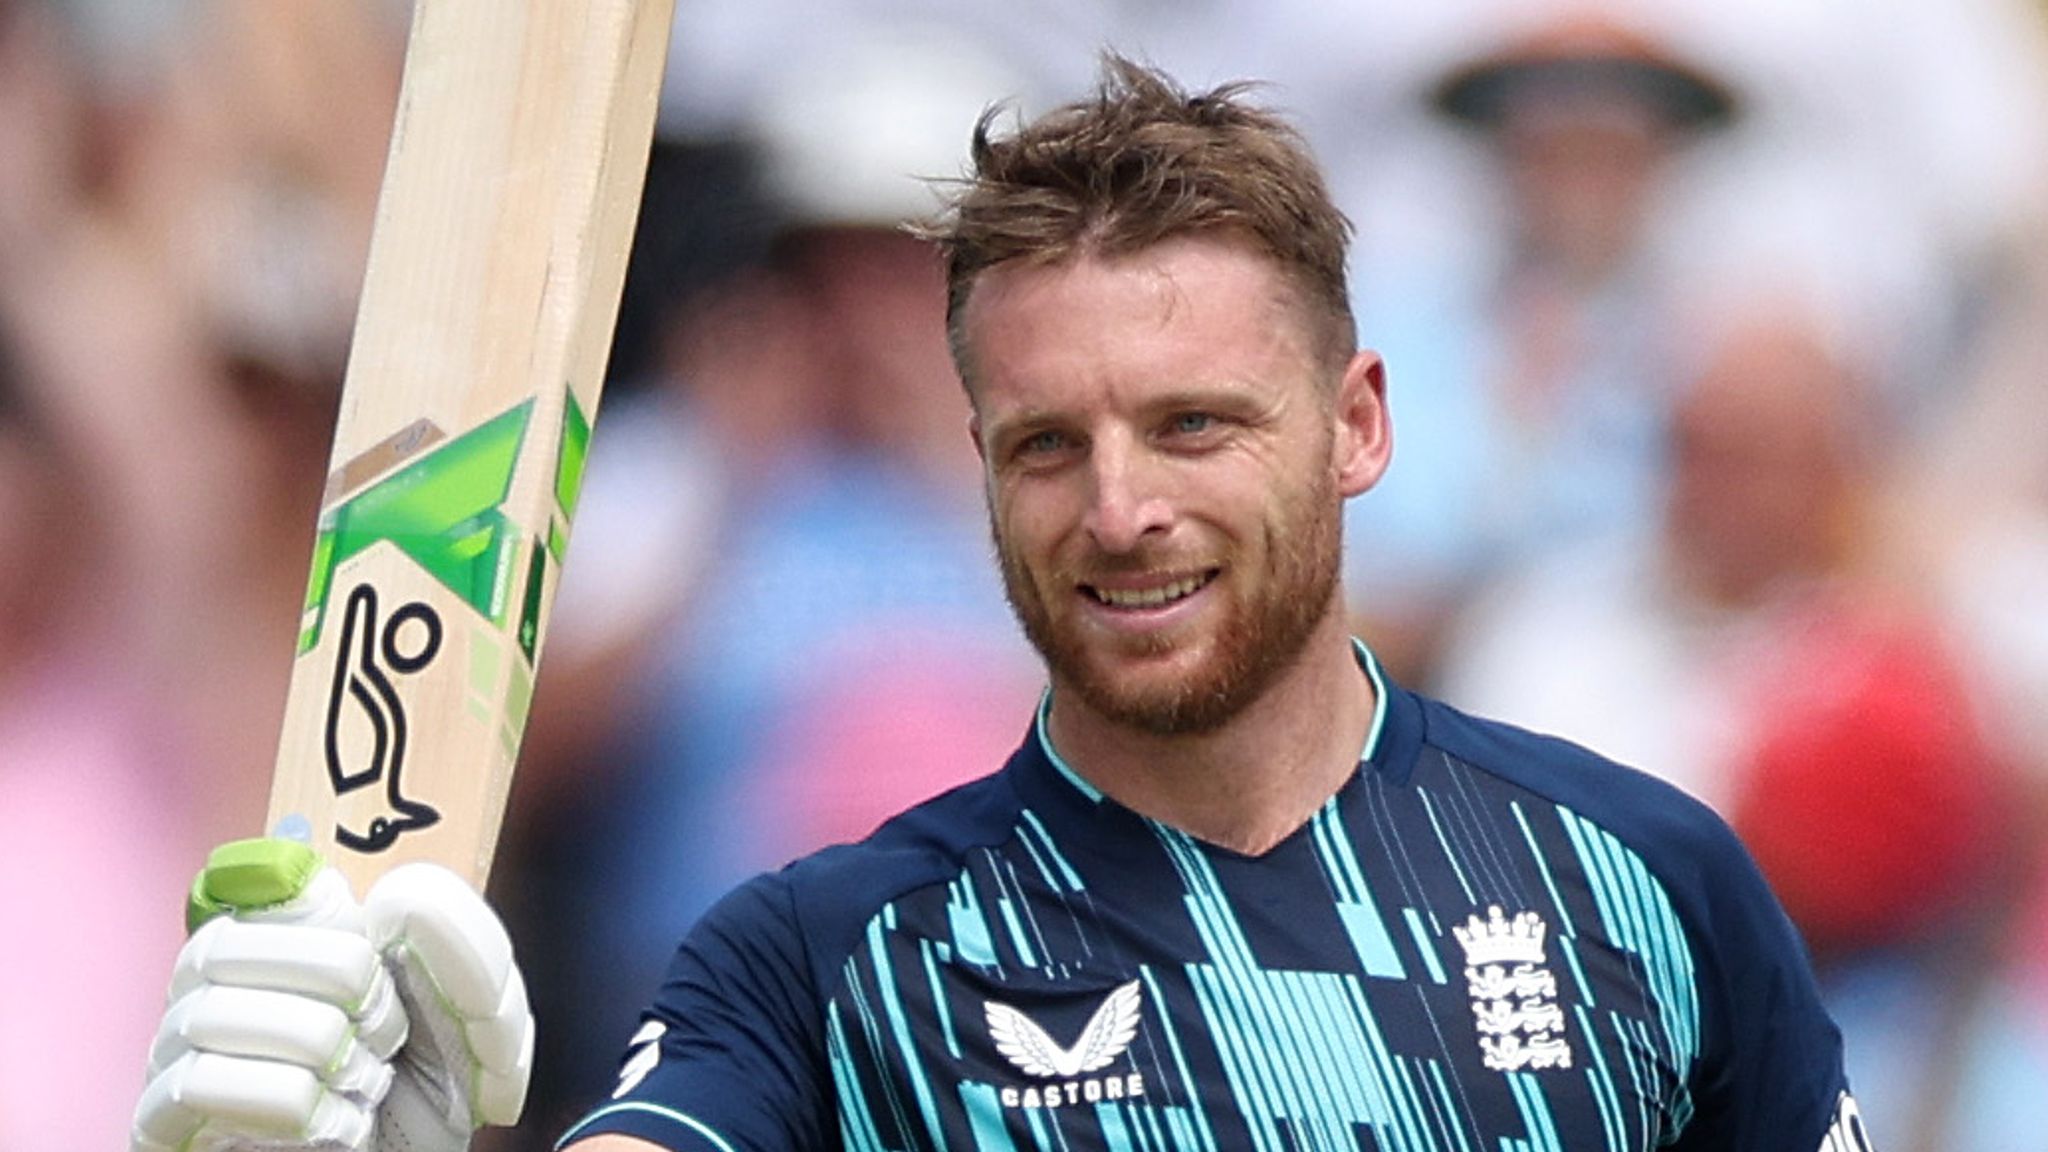 Buttler can return maybe in the last game or two against Pakistan